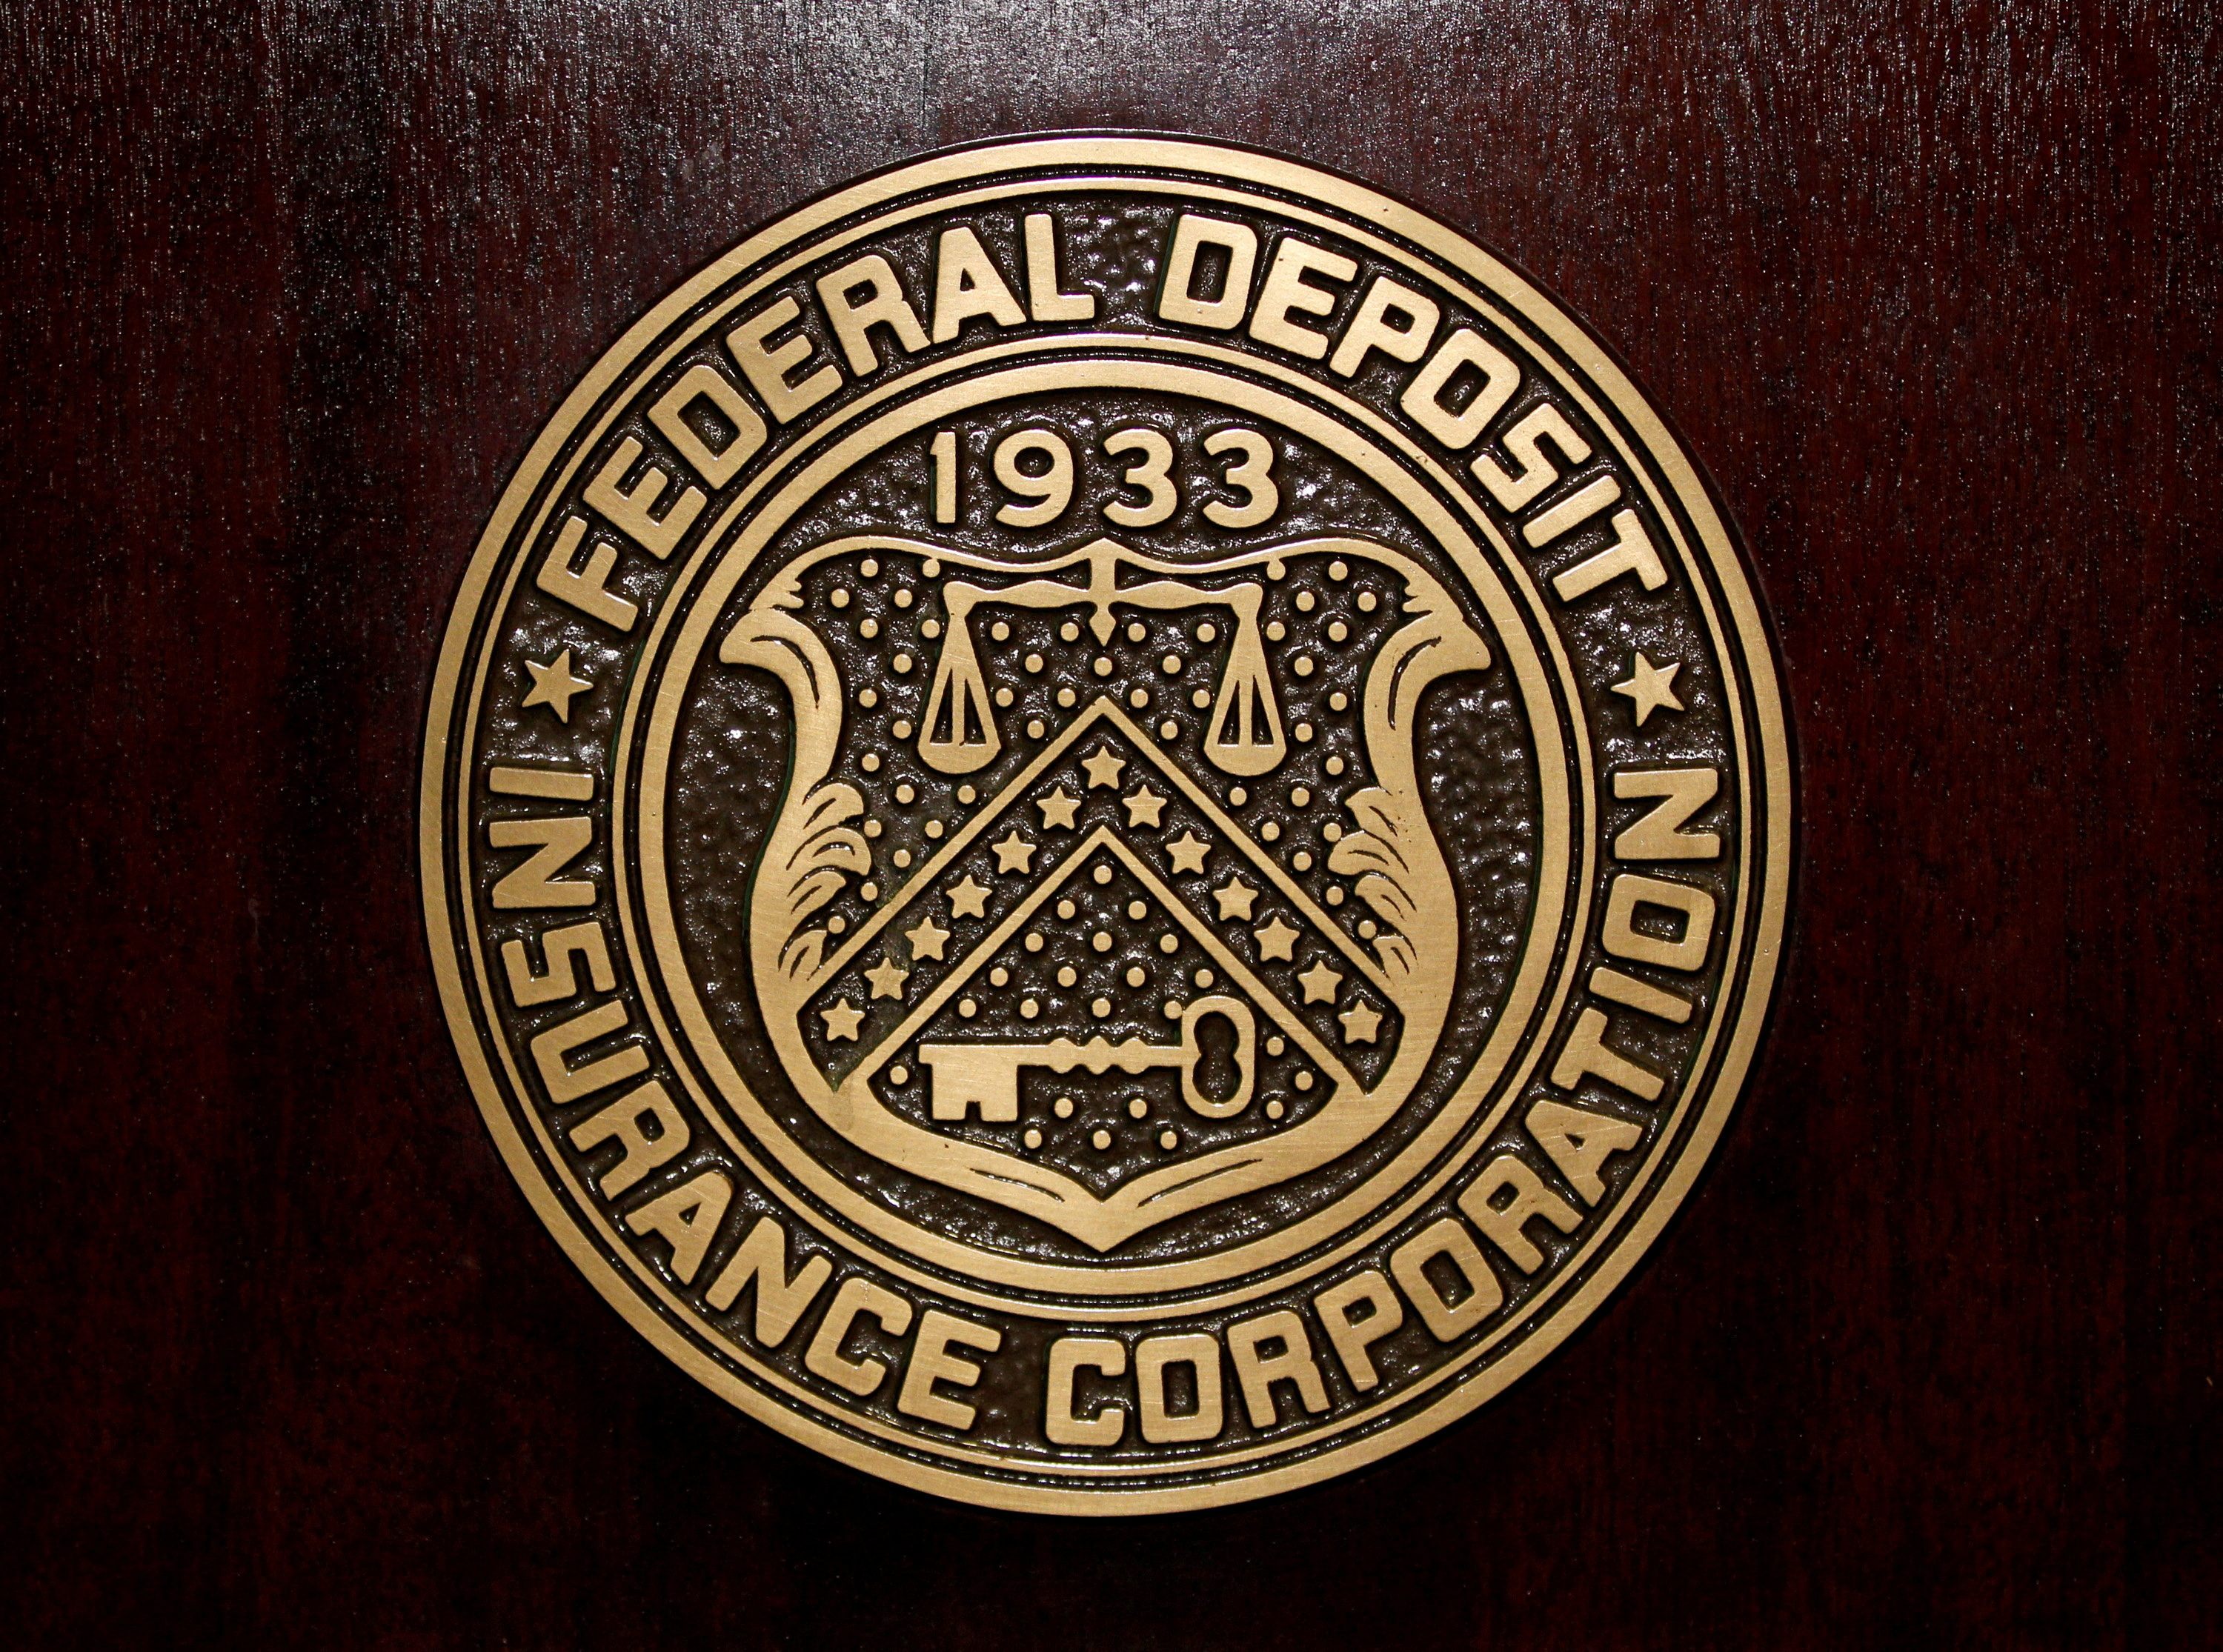 The Federal Deposit Insurance Corp logo is seen at the FDIC headquarters in Washington